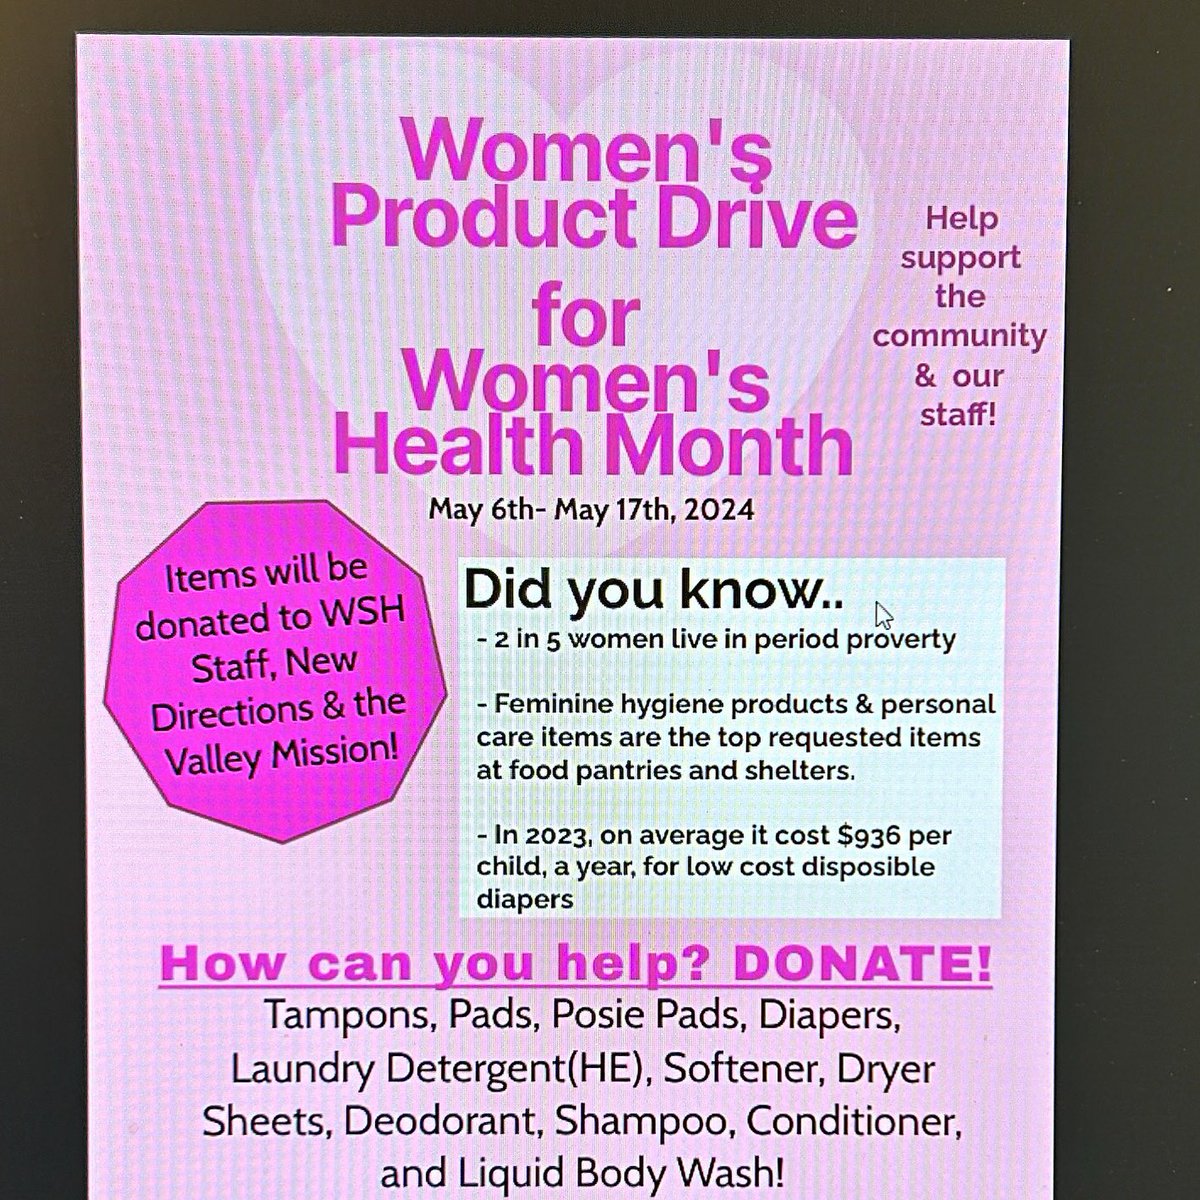 Don’t forget to donate to your local food bank or shelter for women’s health month! #womanshealthcare #transhealthcare